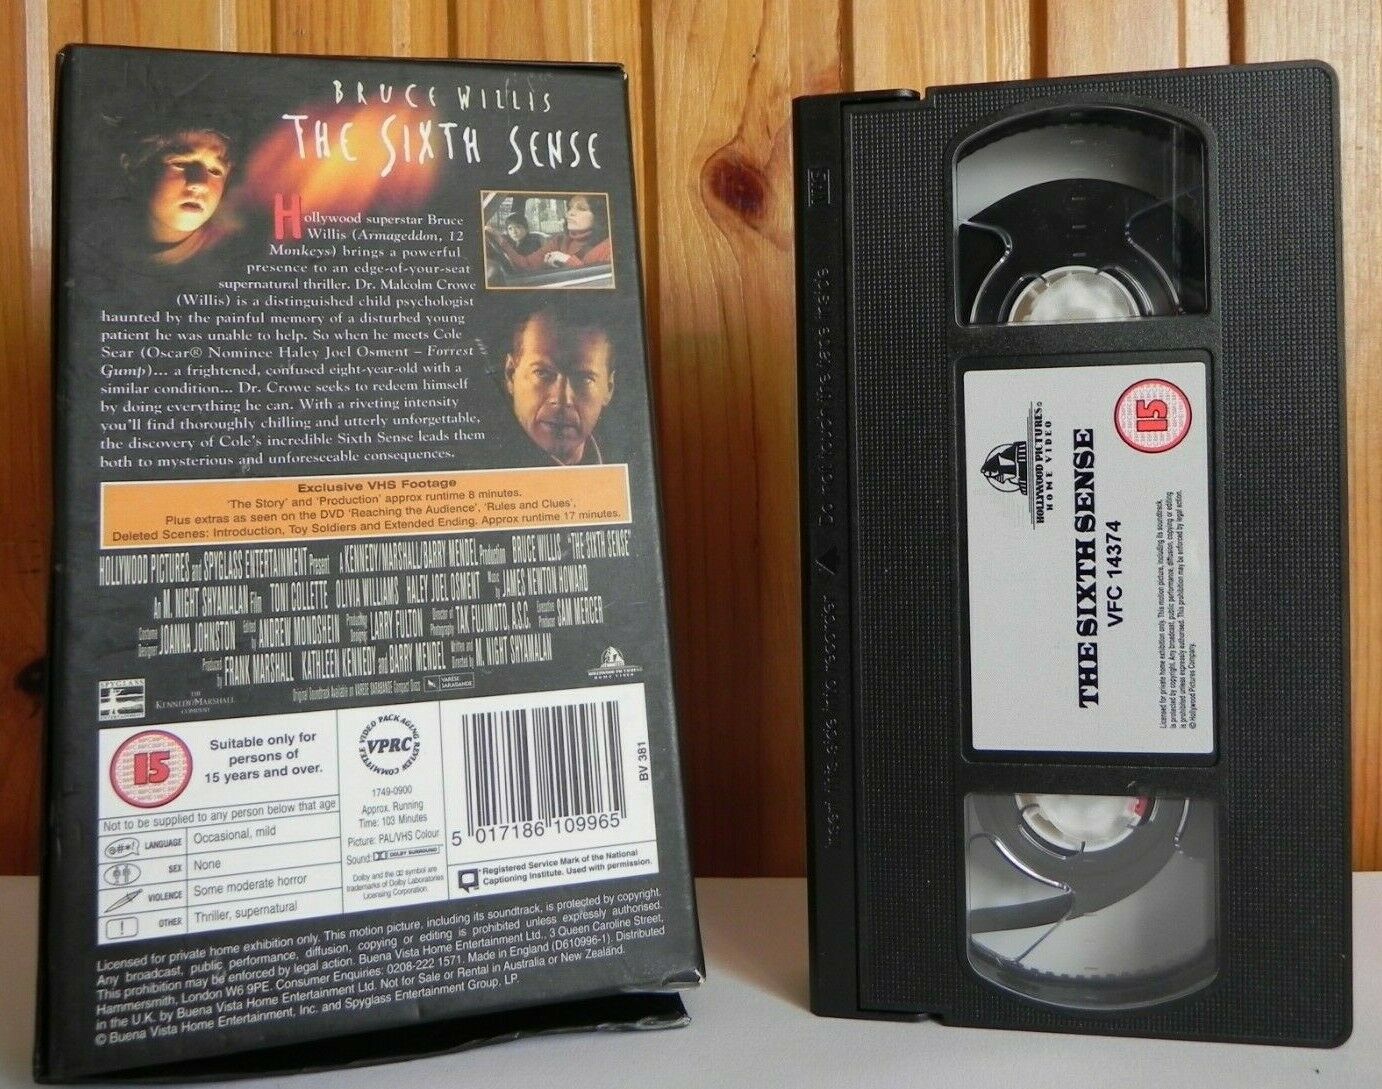 The Sixth Sense [Special Edition]: Mystery Thriller - Bruce Willis - Pal VHS-